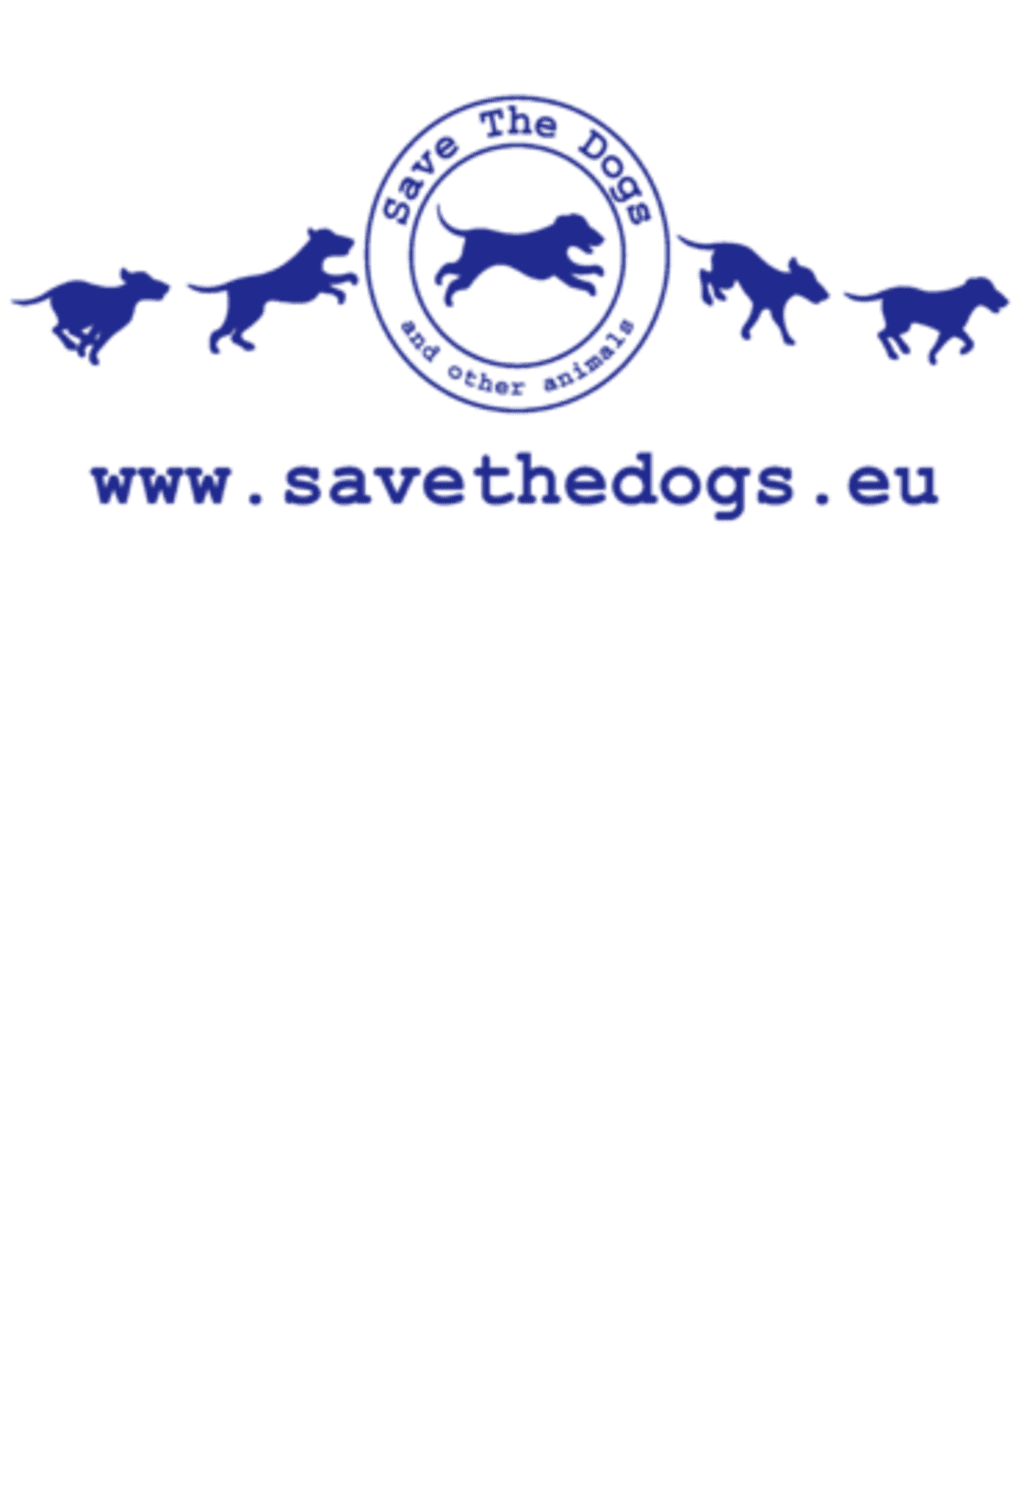 SAVE THE DOGS